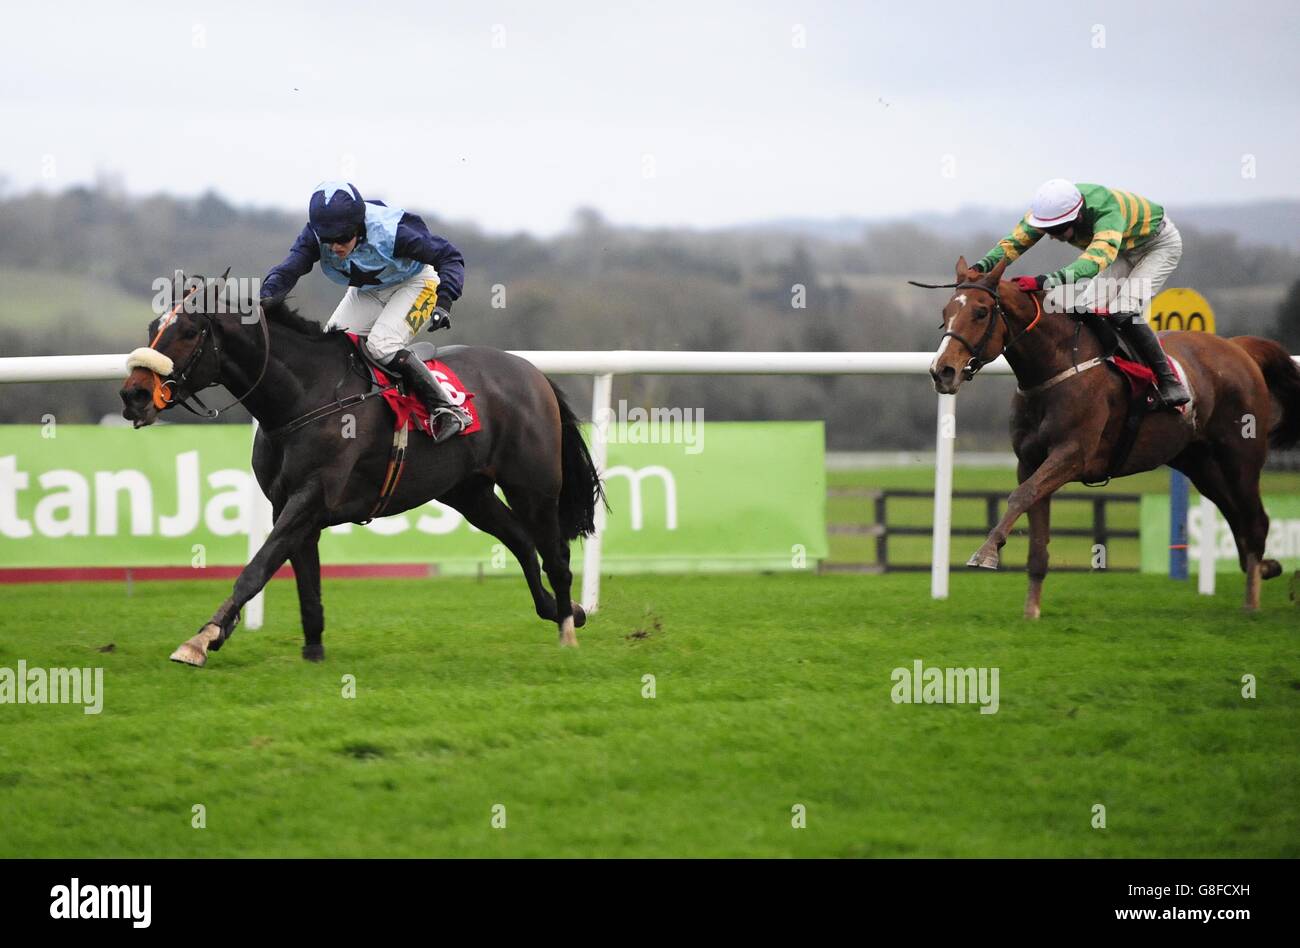 Billy's Hope ridden by Kate Harrington (left) on their way to victory in the Blackhills (Pro/Am) Flat Race during day two of the Winter Festival at Punchestown Racecourse, Co. Kildare, Ireland. Stock Photo